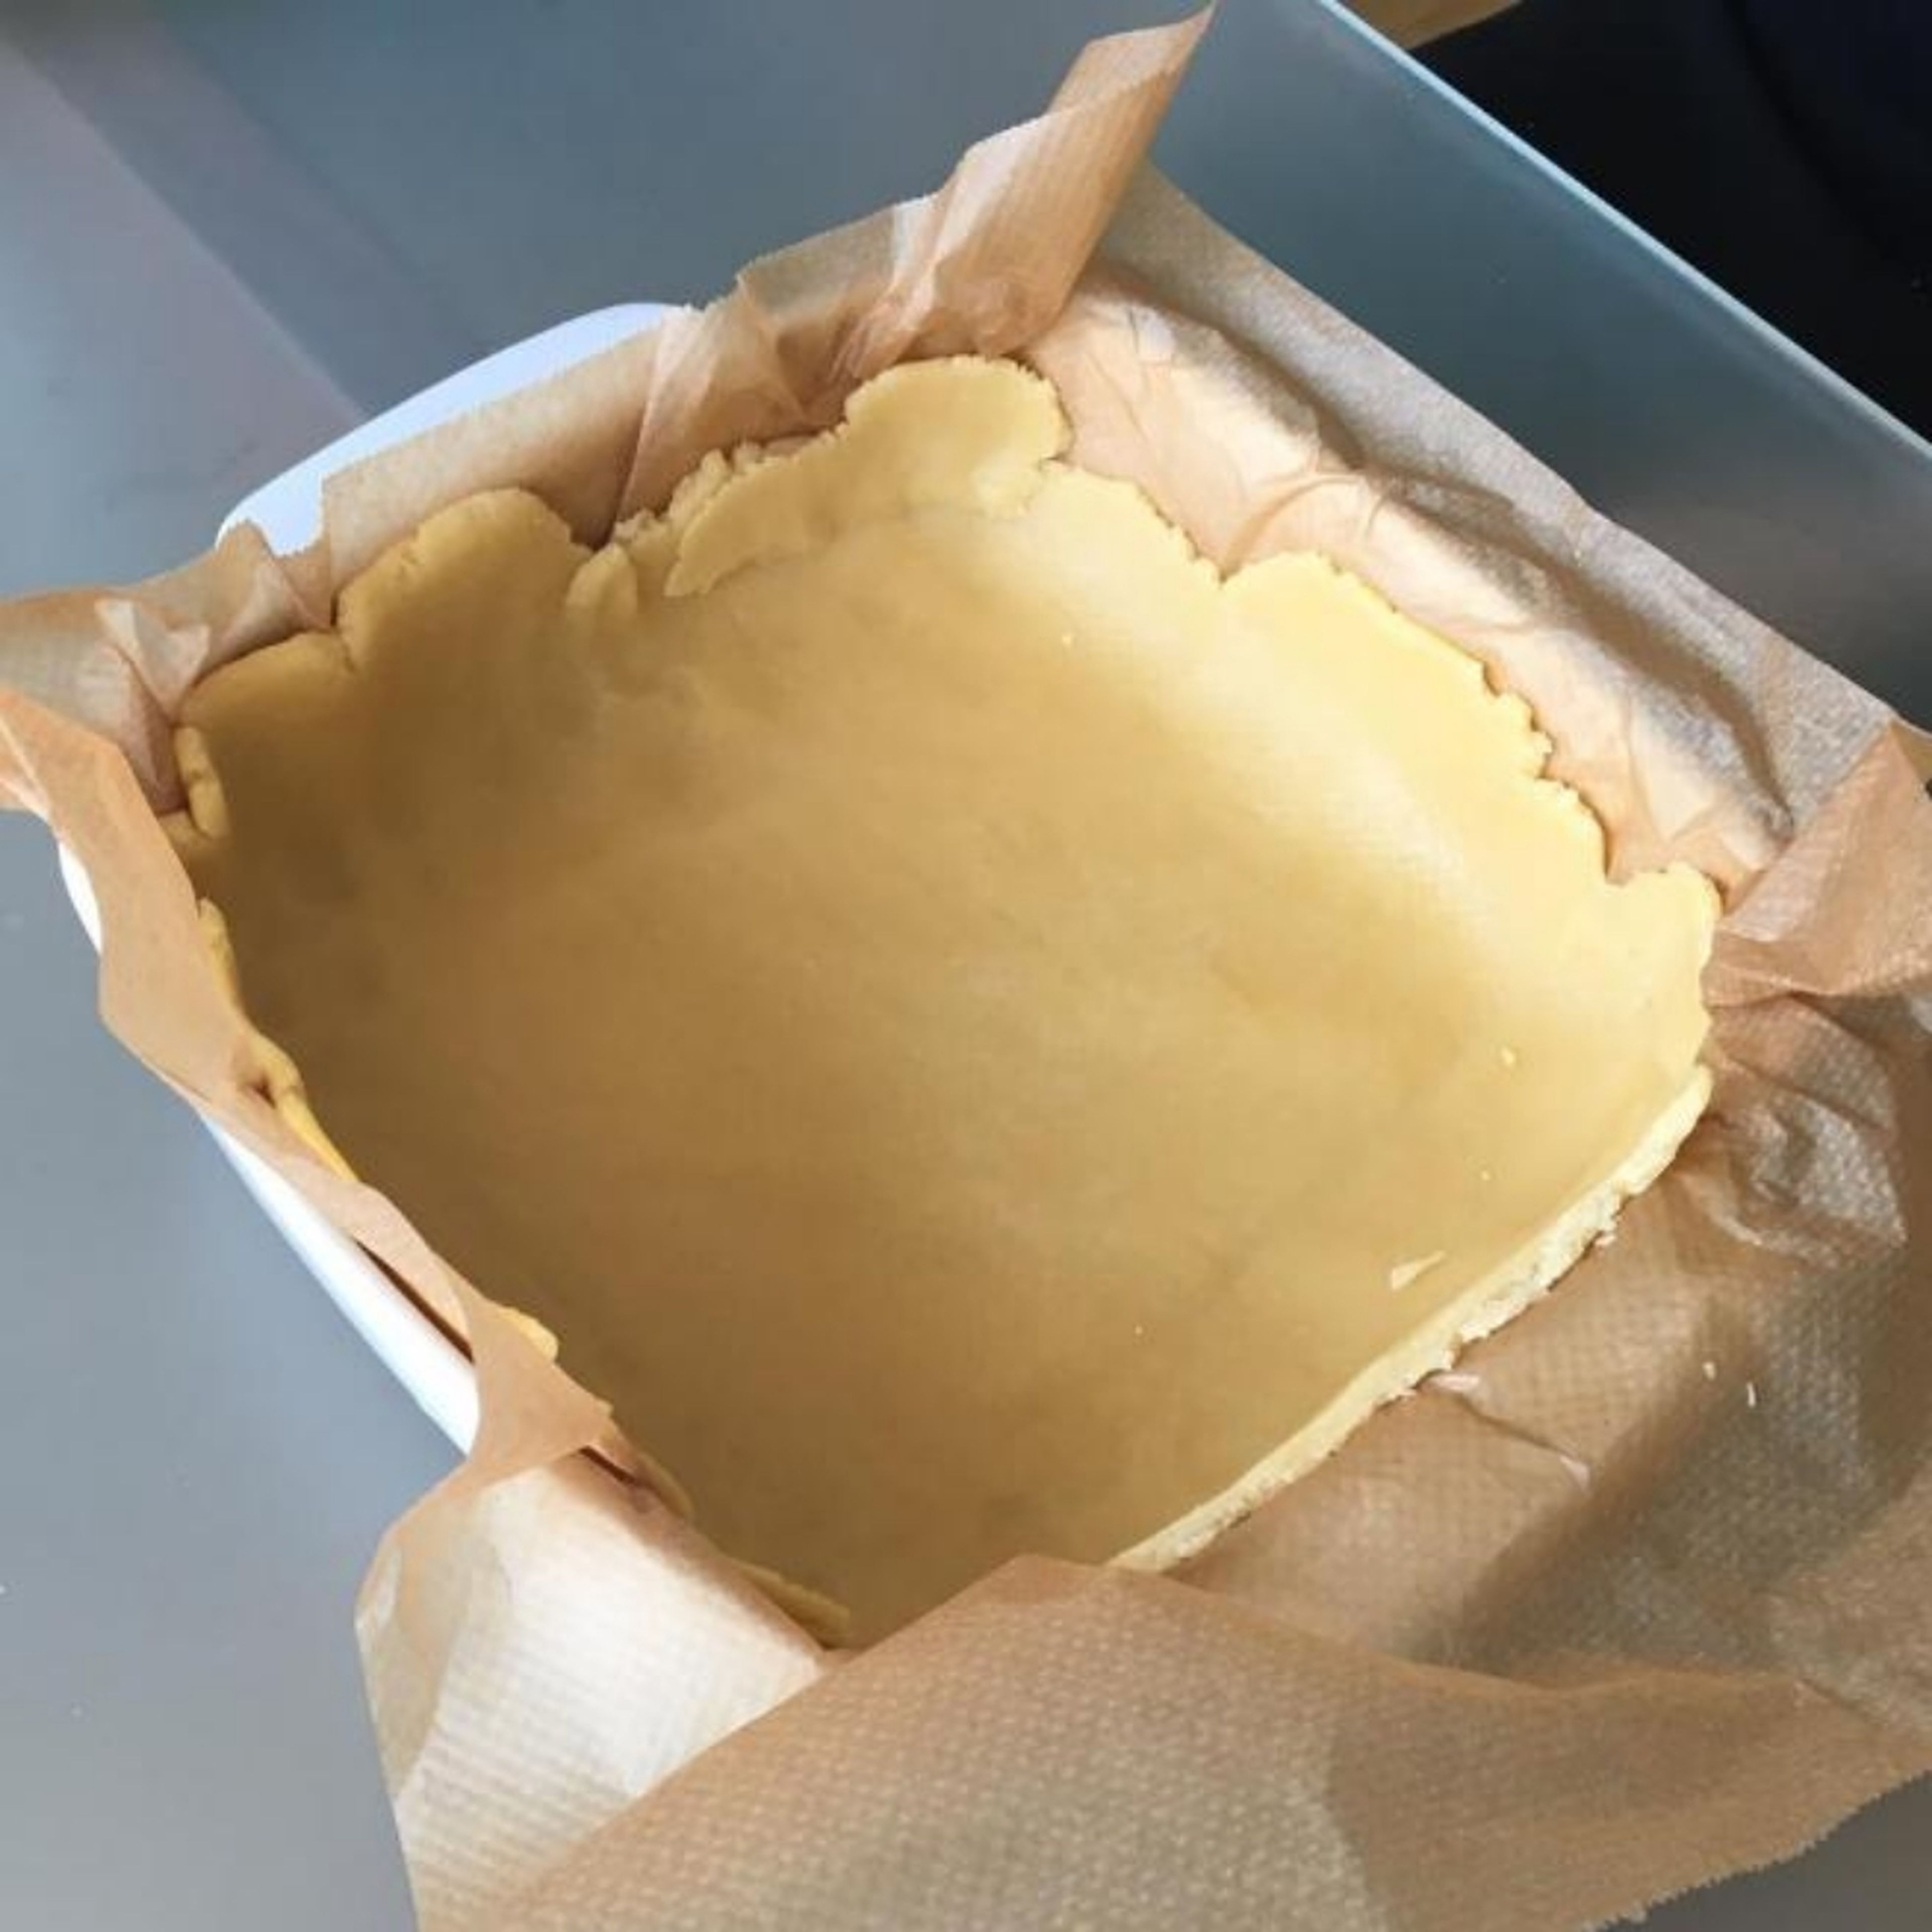 Take the dough from the fridge and put it into a baking pan keeping the baking paper underneath. Remove the dough in excess from the sides and save it for the stripes.